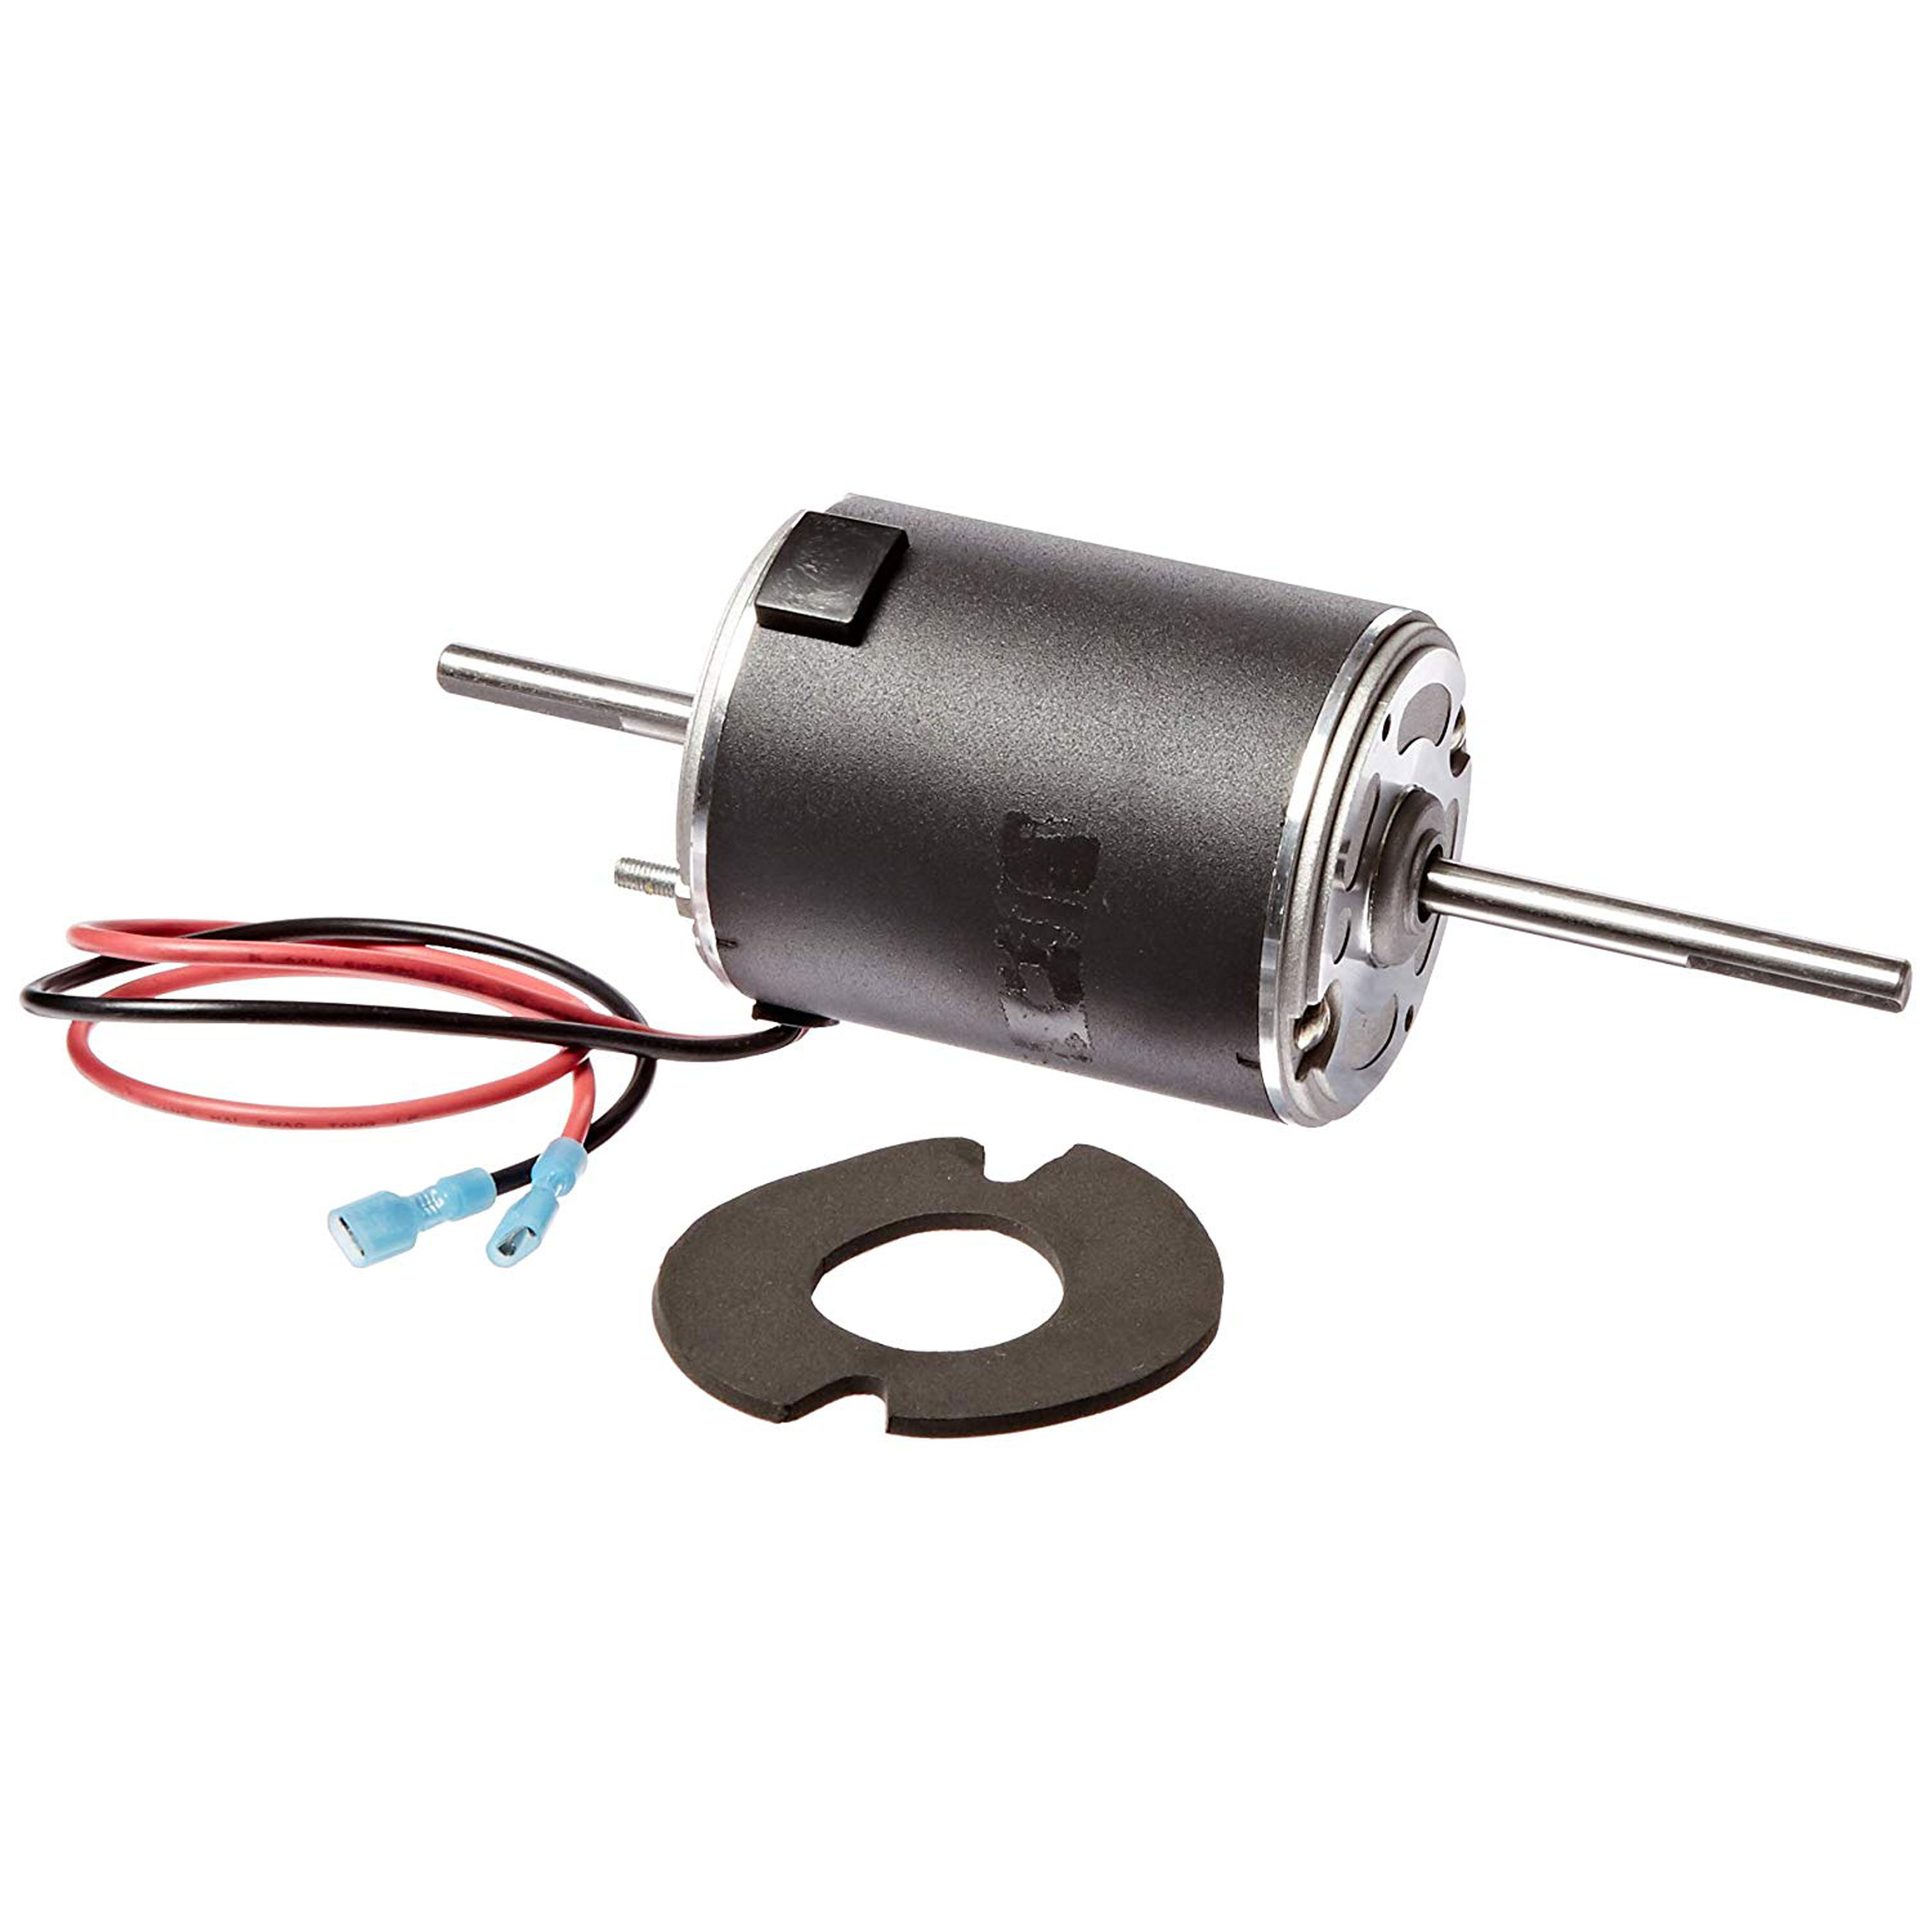 Suburban MFG 233004 RV Part Component Replacement Furnace Motor for SF Series